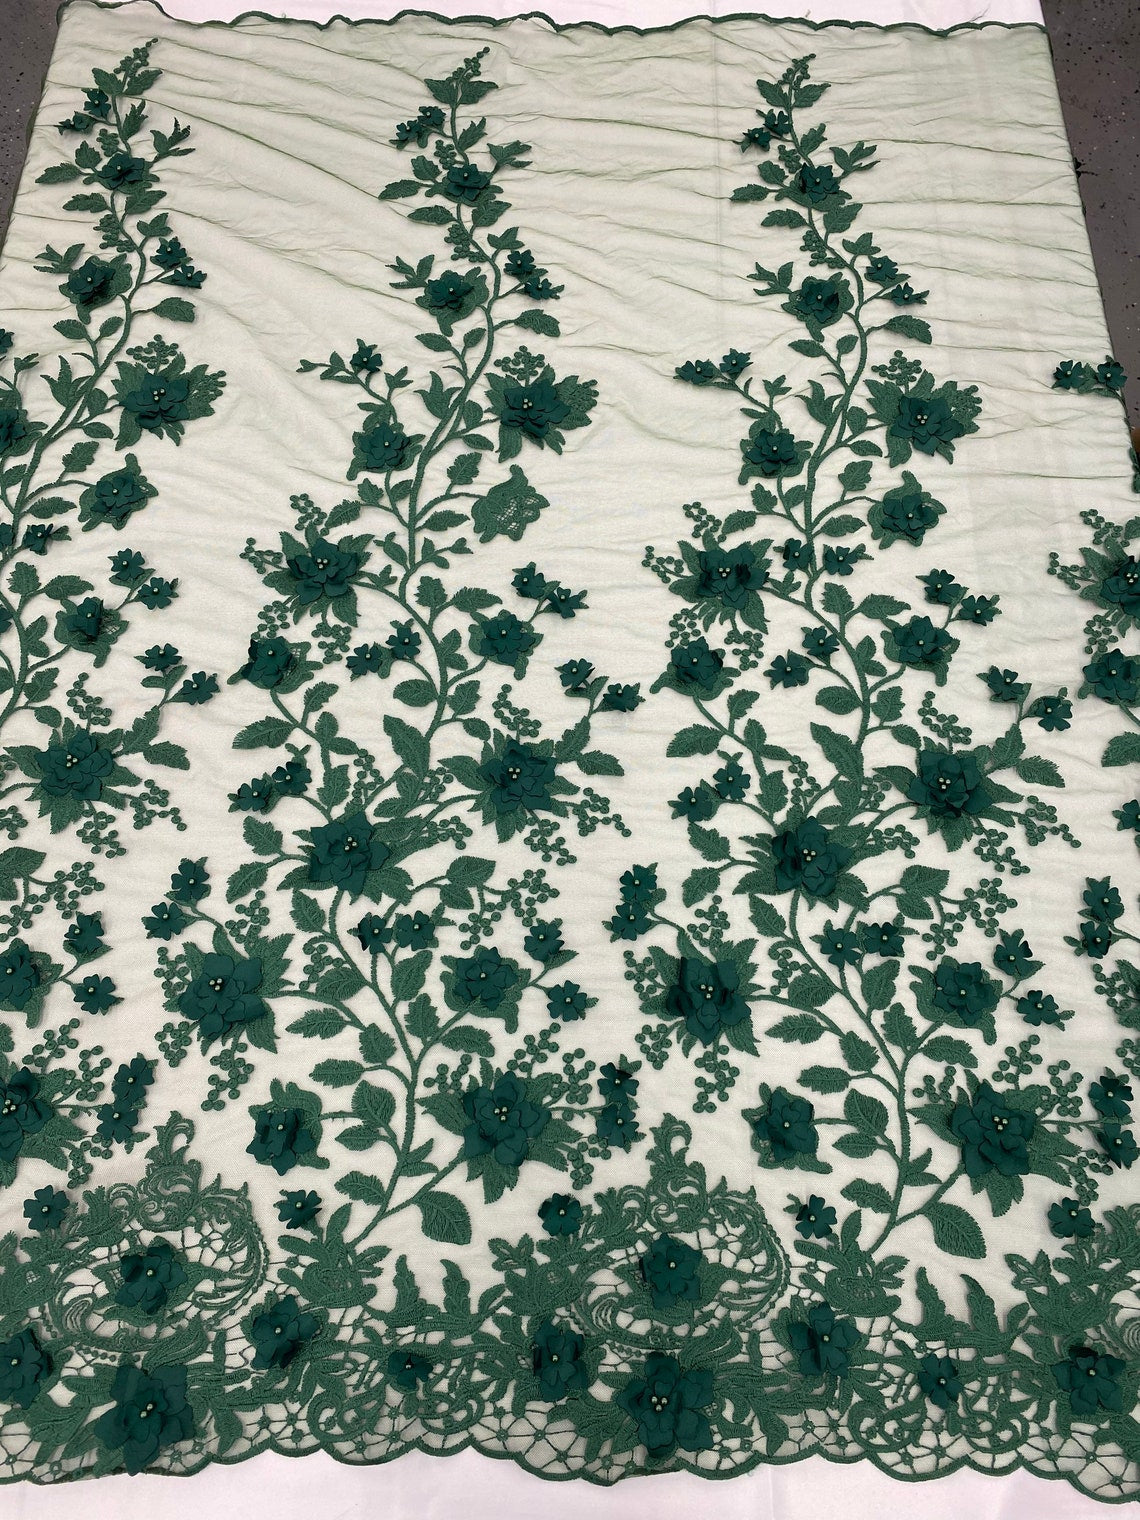 3D Floral Princess Fabric - Hunter Green - Embroidered Floral Lace Fabric with 3D Flowers By Yard